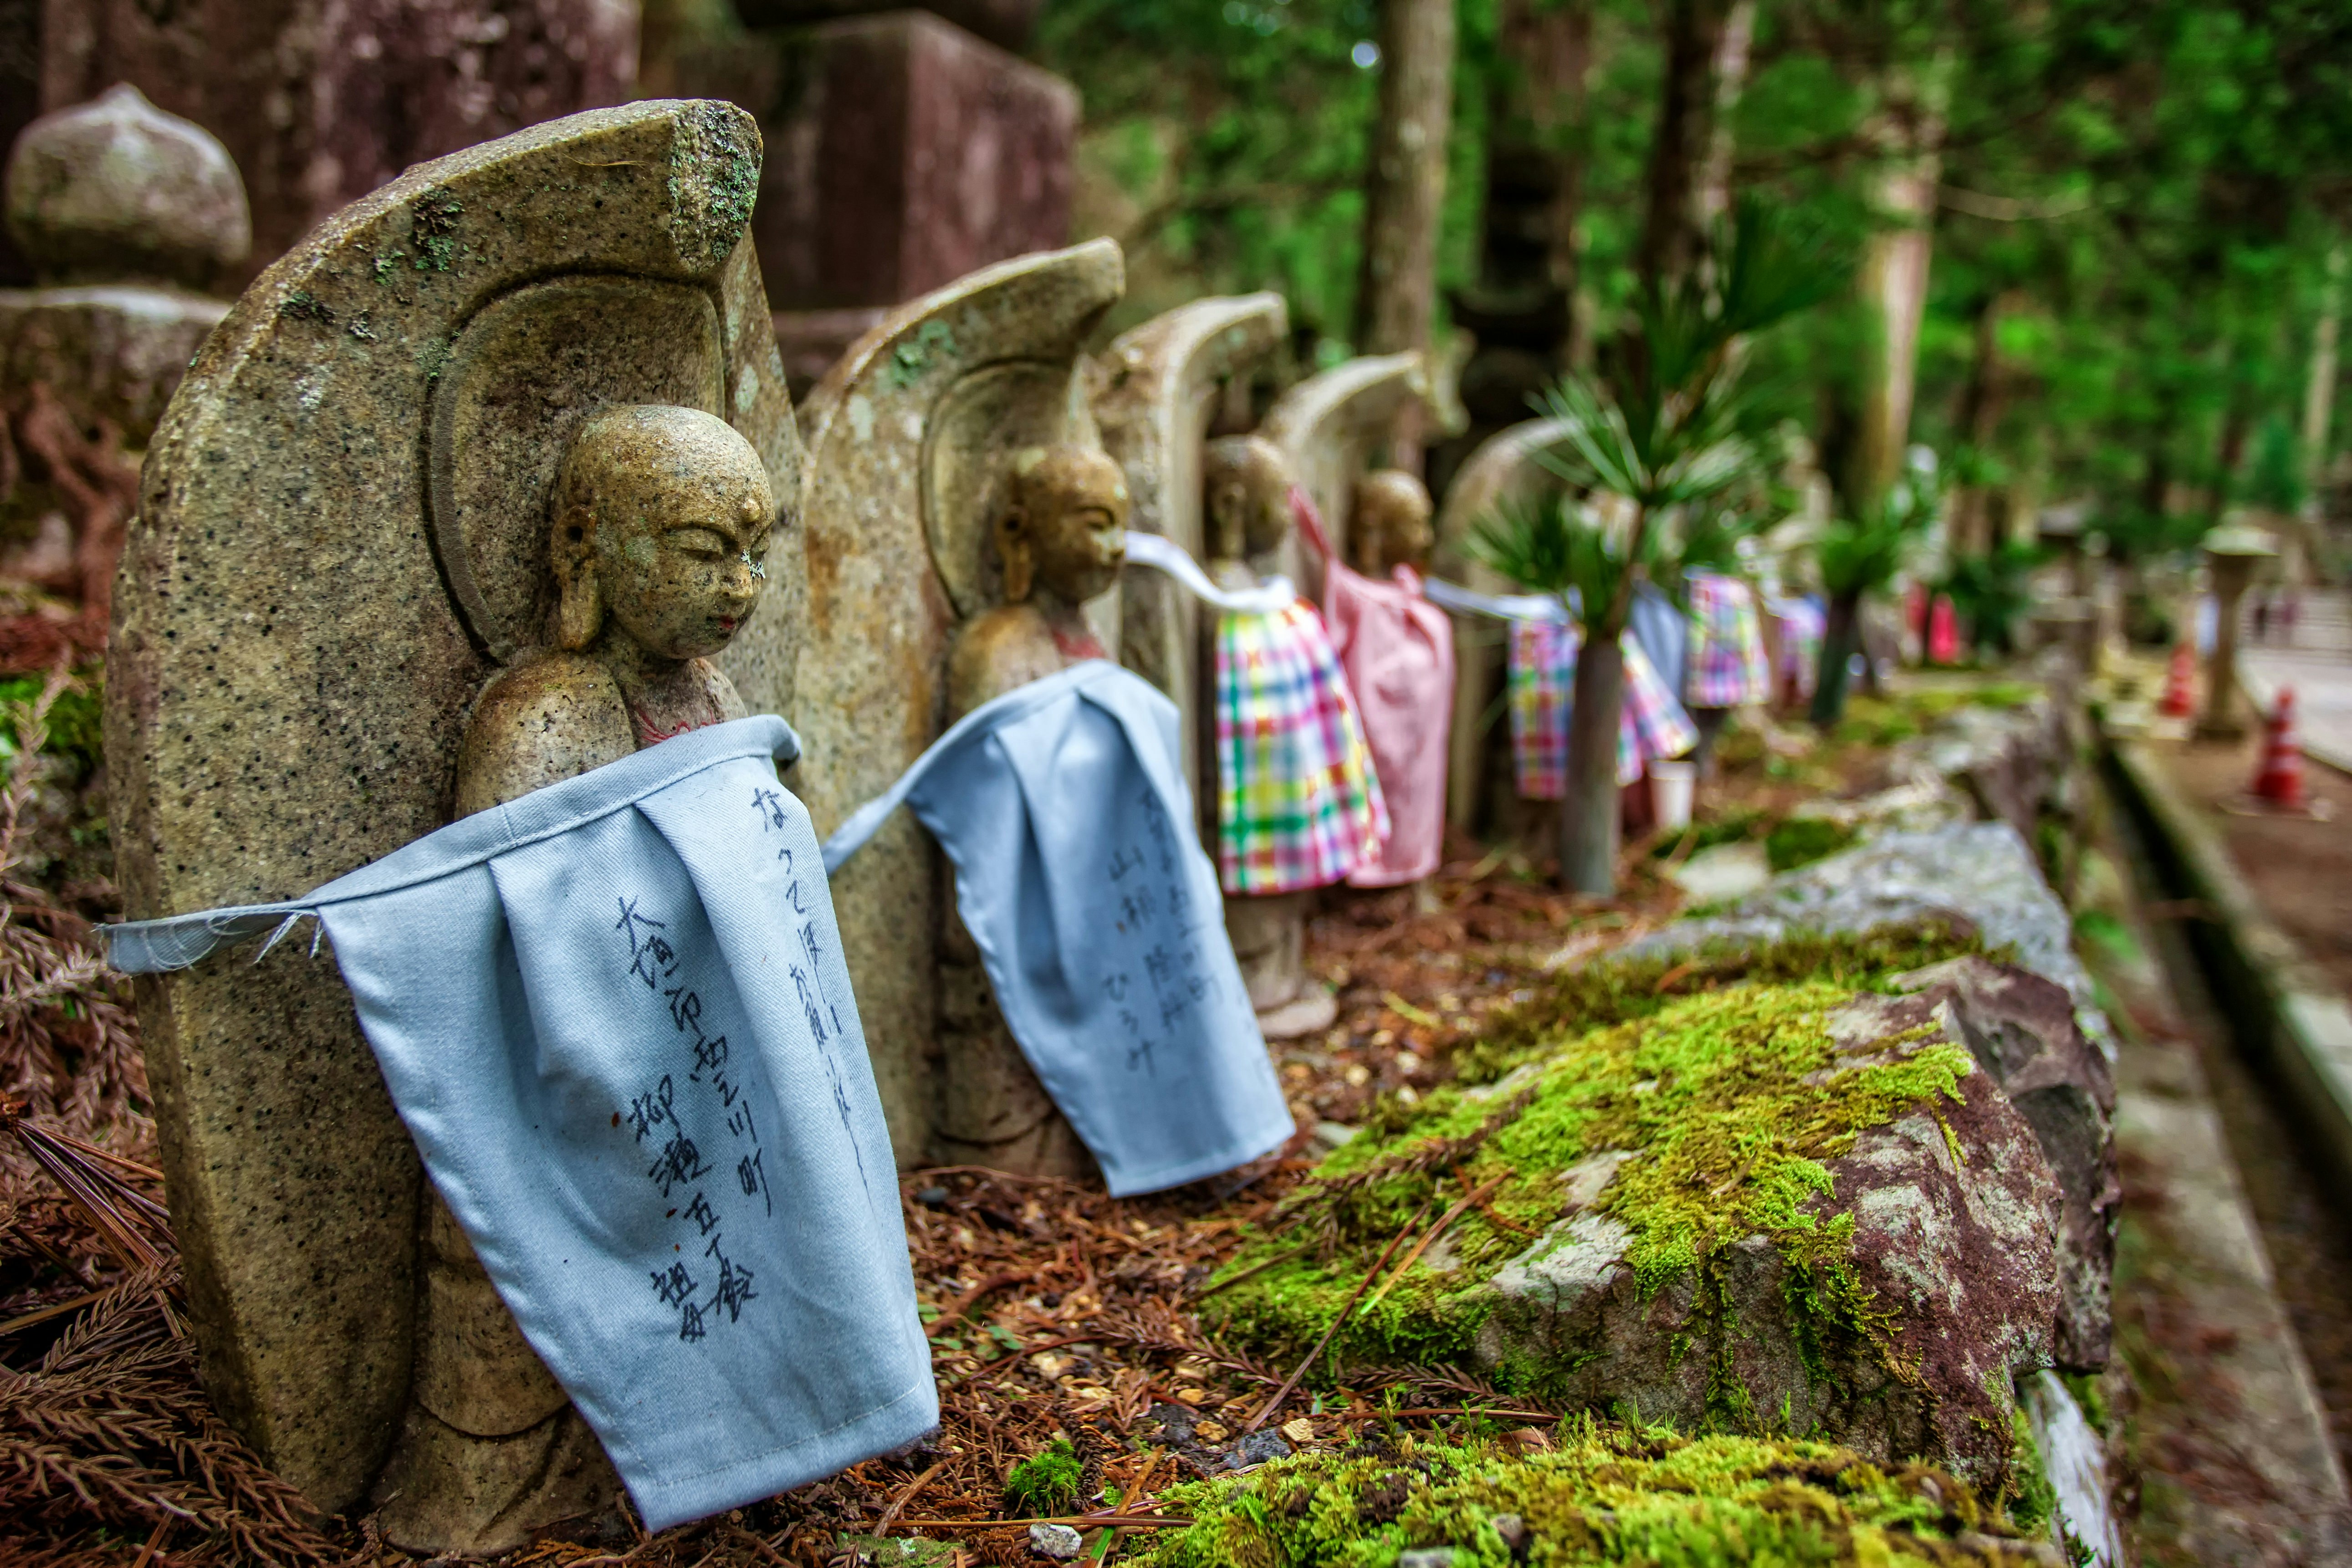 Okunoin Cemetery in Koyasan, Japan. A number of small stone statues are wrapped in fabric, amidst a forest setting.